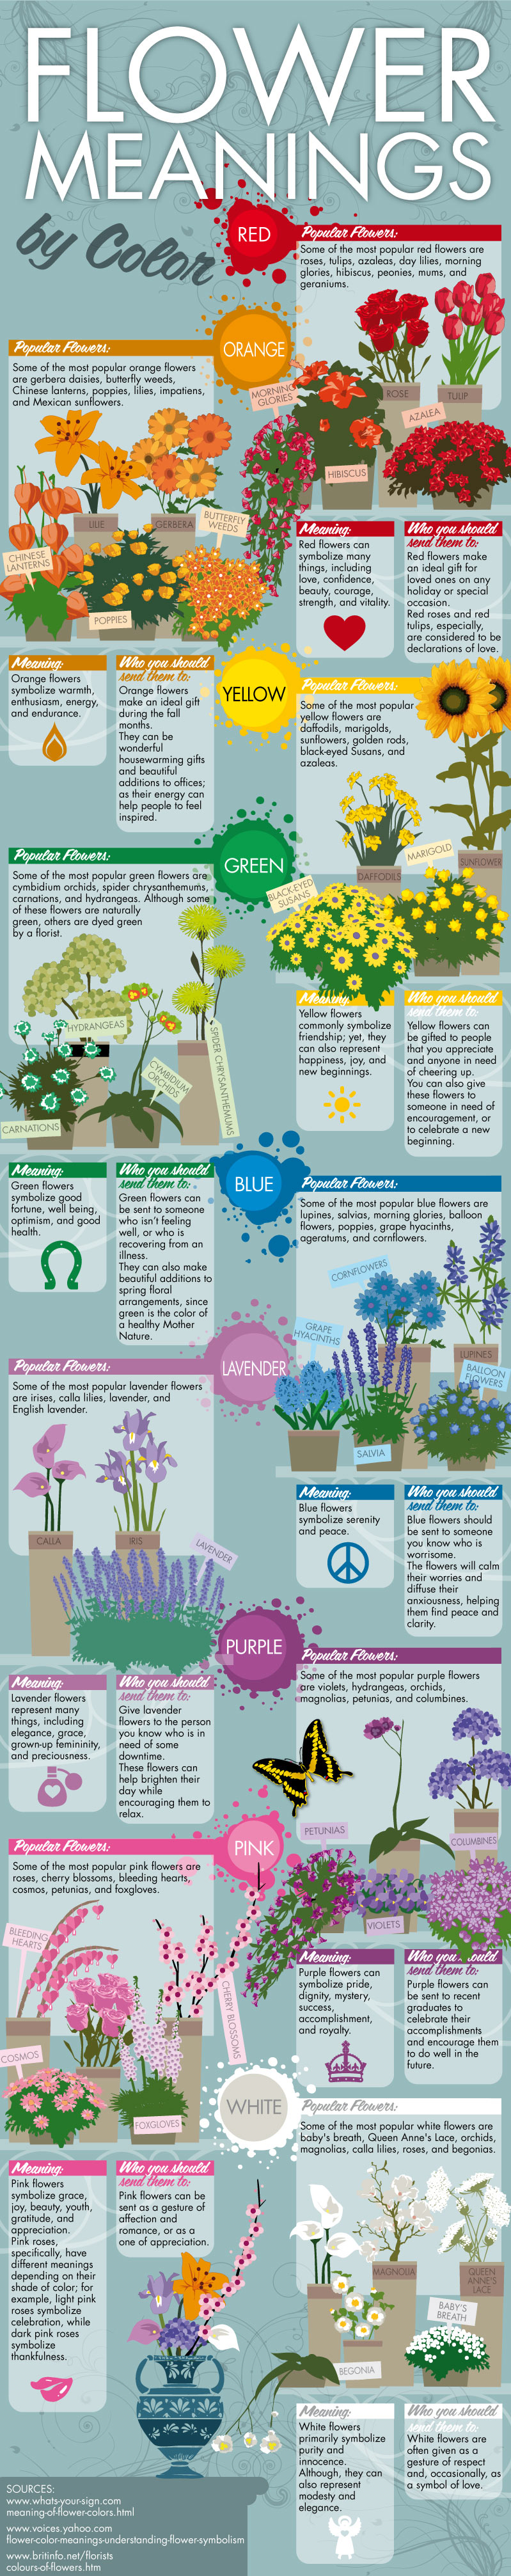 Infographic - Flower Meanings By Color